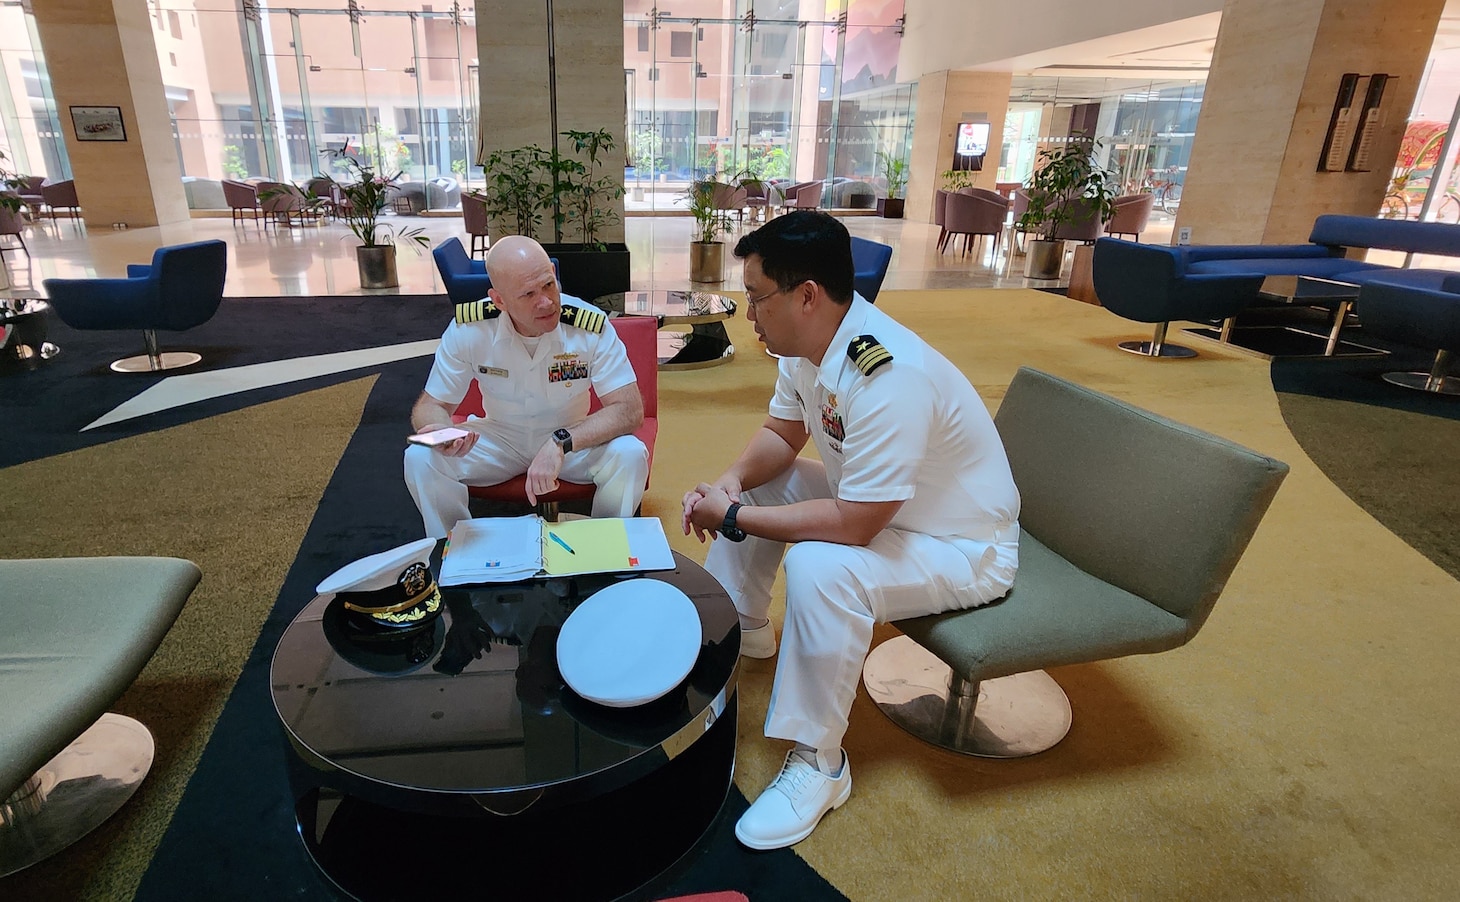 240422-N-NR876-1522 CHATTOGRAM, Bangladesh (April 22, 2024)- Capt. Matthew Scarlett, left, Commander, Destroyer Squadron (DESRON) 7 deputy commodore discusses the schedule of events with Lt. Cmdr. Jun Chen, lead U.S. planner, prior to the opening ceremony for Cooperation Afloat Readiness and Training (CARAT) Exercise Bangladesh 2024 in Chattogram, Bangladesh, Apr. 22. As the 30th iteration of the Cooperation Afloat Readiness and Training (CARAT) series, 2024 highlights the longstanding role of CARAT as a credible venue for regional Allies and partners to address shared maritime security priorities. As the U.S. Navy’s destroyer squadron forward-deployed in Southeast Asia, DESRON 7 serves as the primary tactical and operational commander of littoral combat ships rotationally deployed to Singapore, Expeditionary Strike Group 7’s Sea Combat Commander and builds partnerships through training exercises and military-to-military engagements.(U.S. Navy photo by Chief Electronics Technician Nguyet Mai)